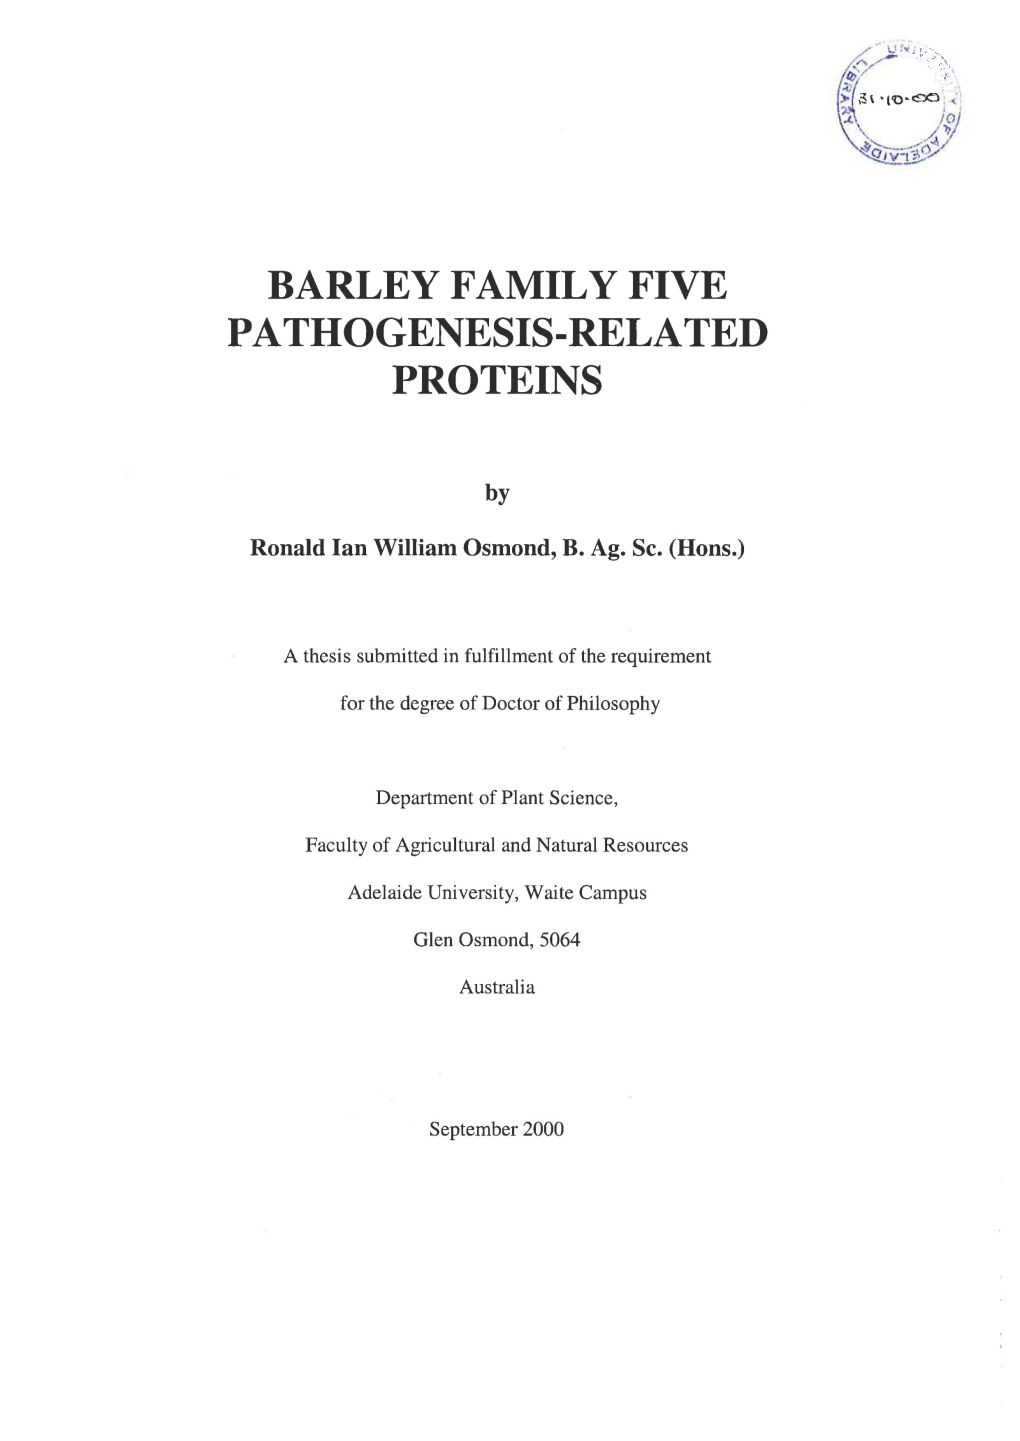 Barley Family Five Pathogenesis-Related Proteins